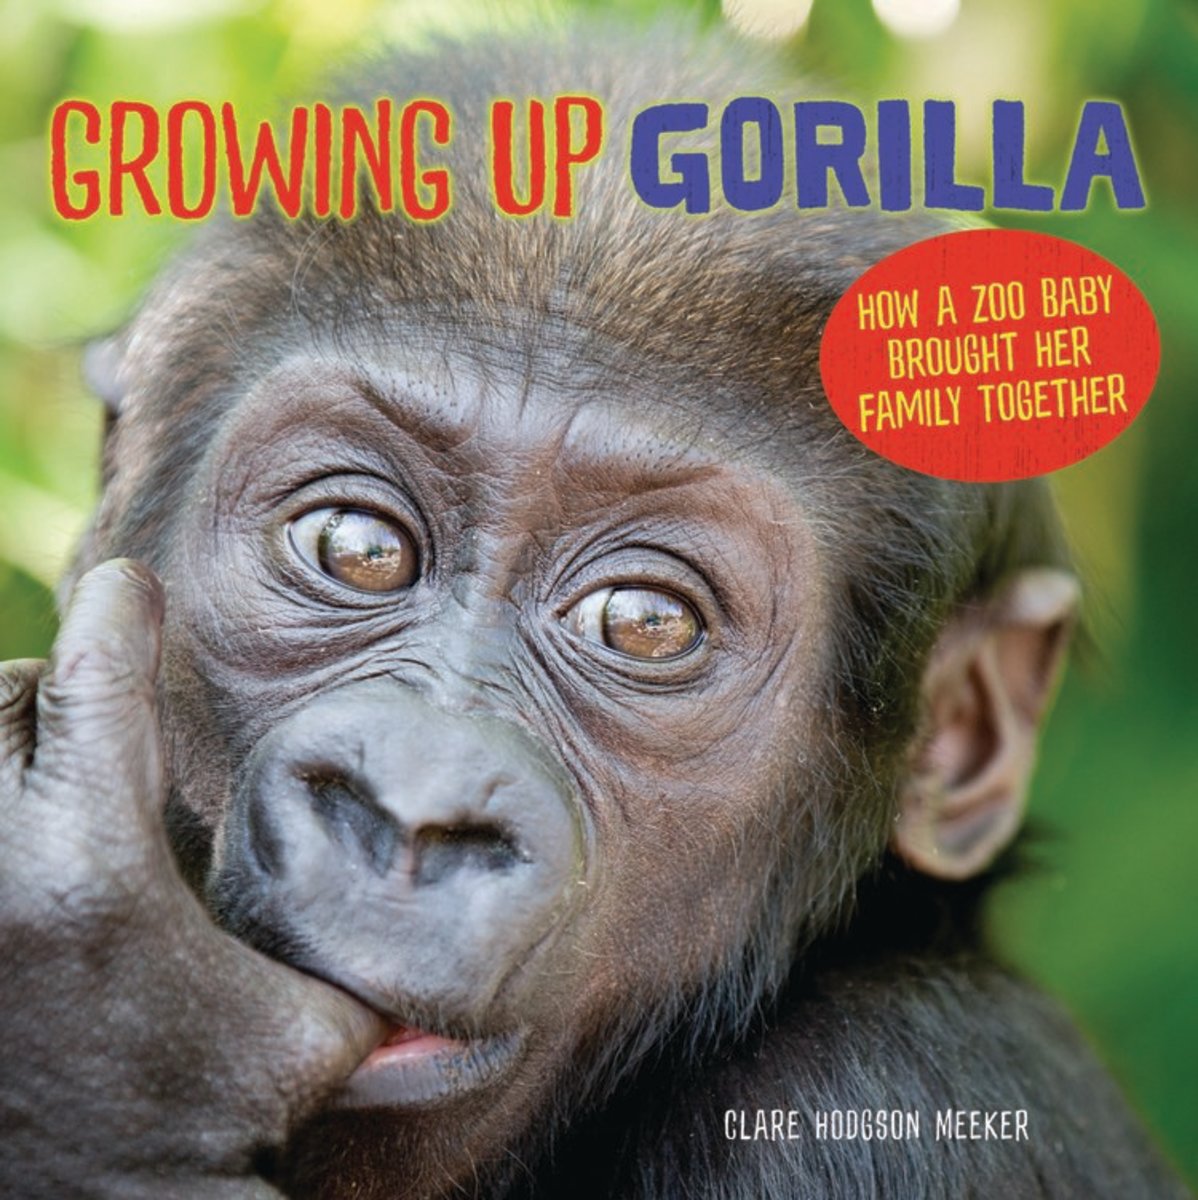 Growing up Gorilla: How a Zoo Baby Brought Her Family Together by Clare Hodgson Meeker